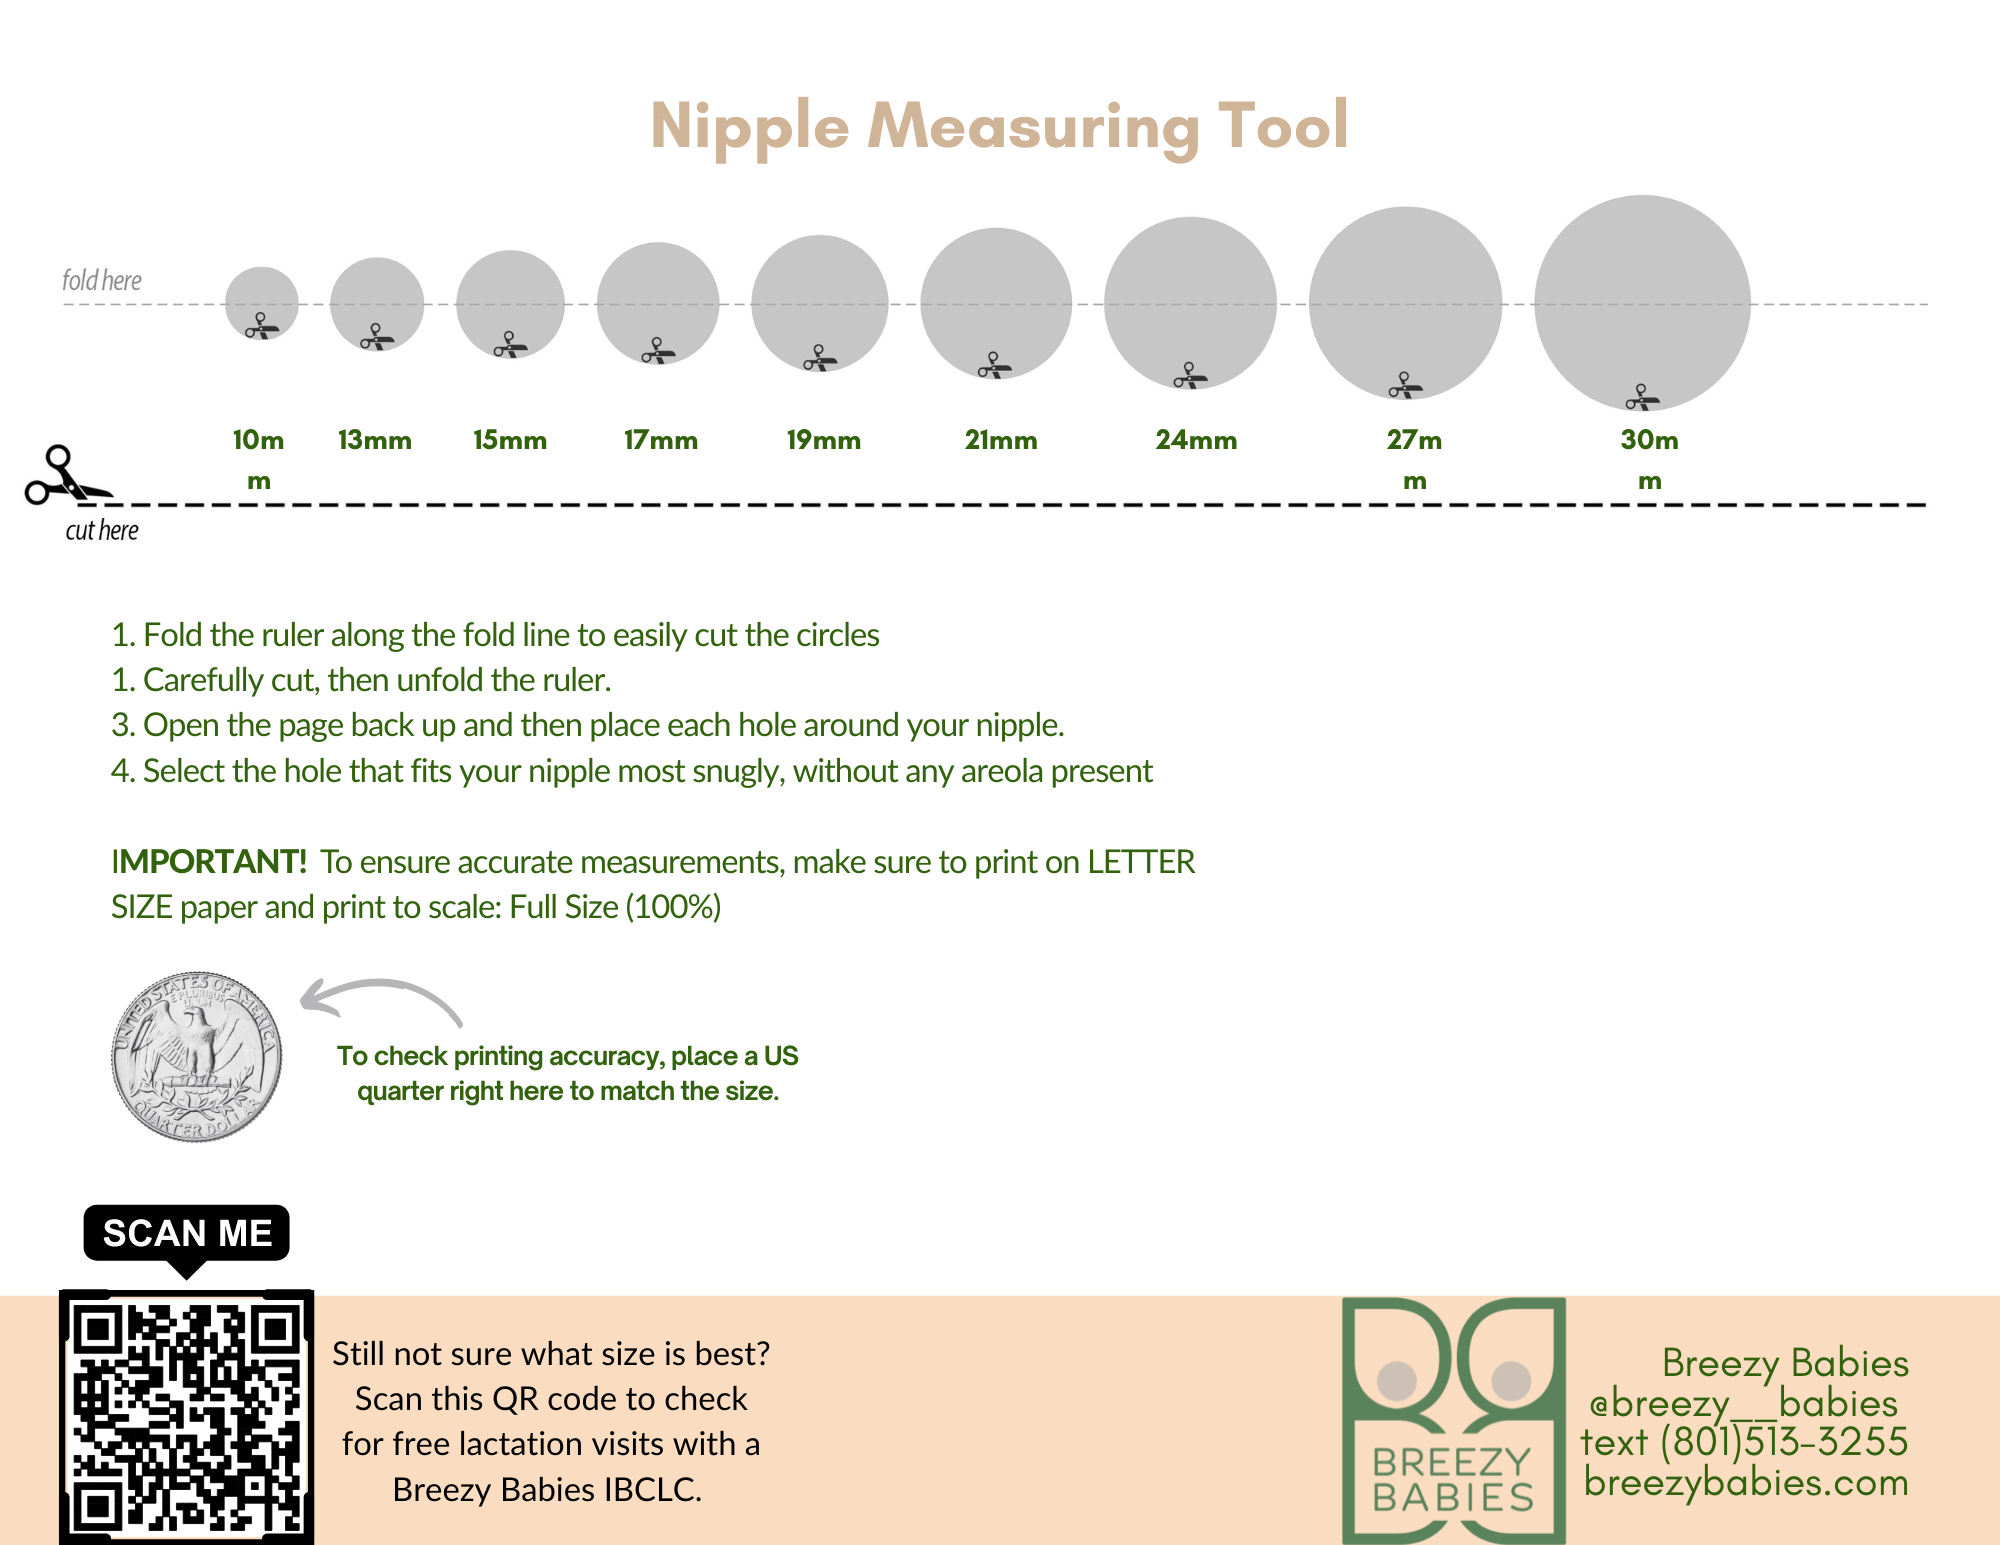 FREE Nipple Measuring Tool: Find Your Flange Size – Breezy Babies